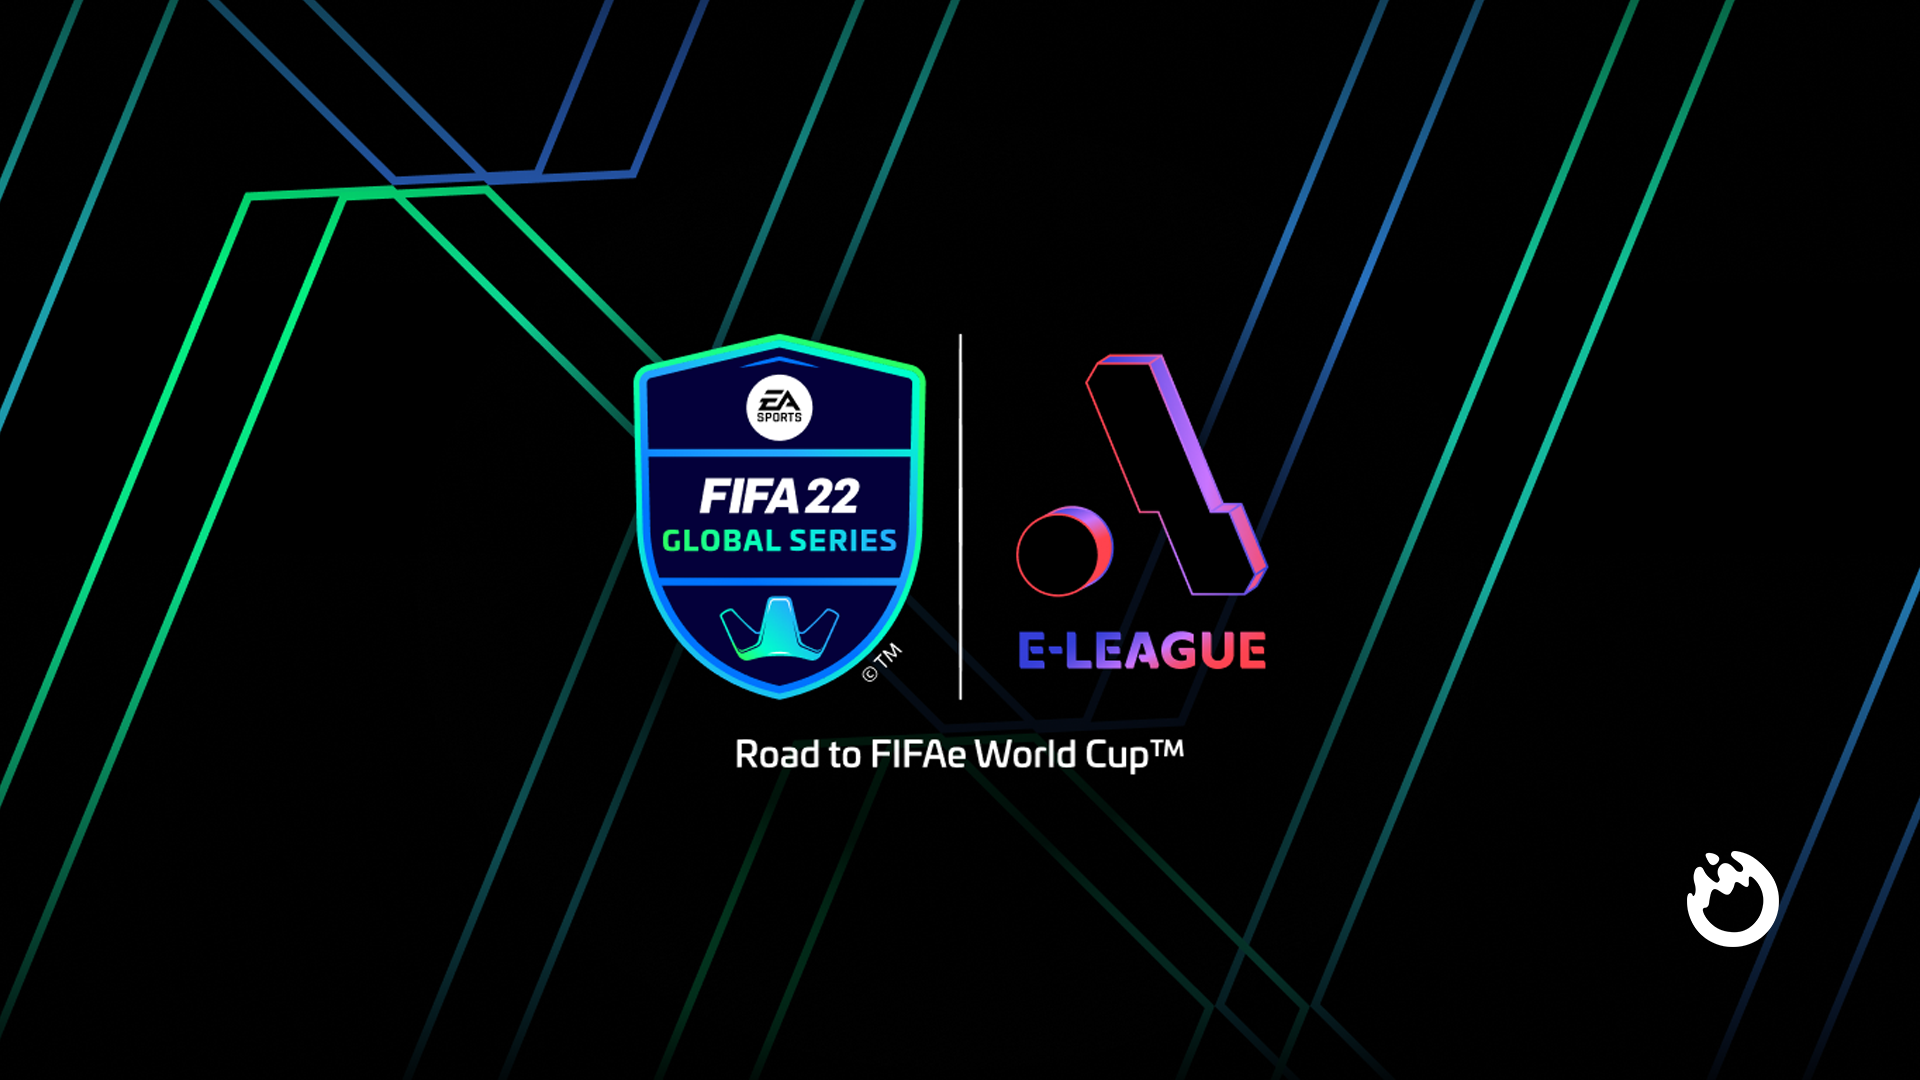 E-League returns for FIFA 22 with an open qualifier format exclusively on PlayStation